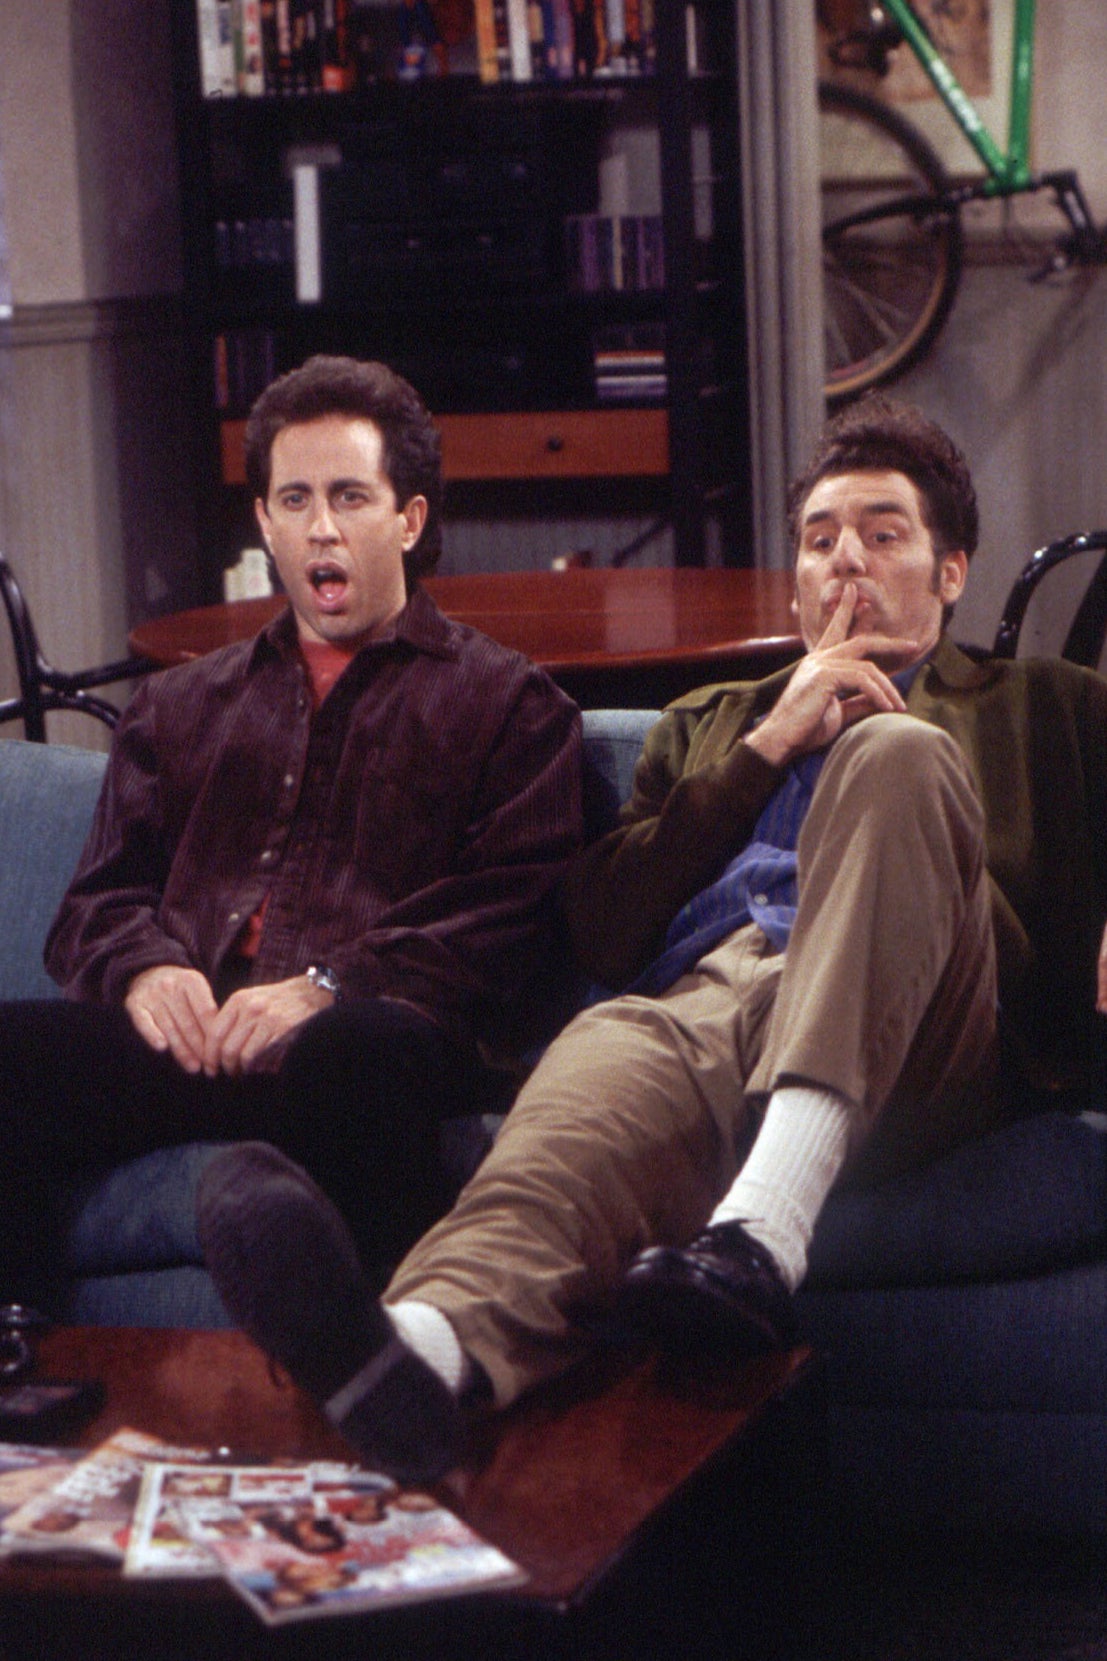 Shock comedy: Jerry Seinfeld and Michael Richards in an episode of ‘Seinfeld’